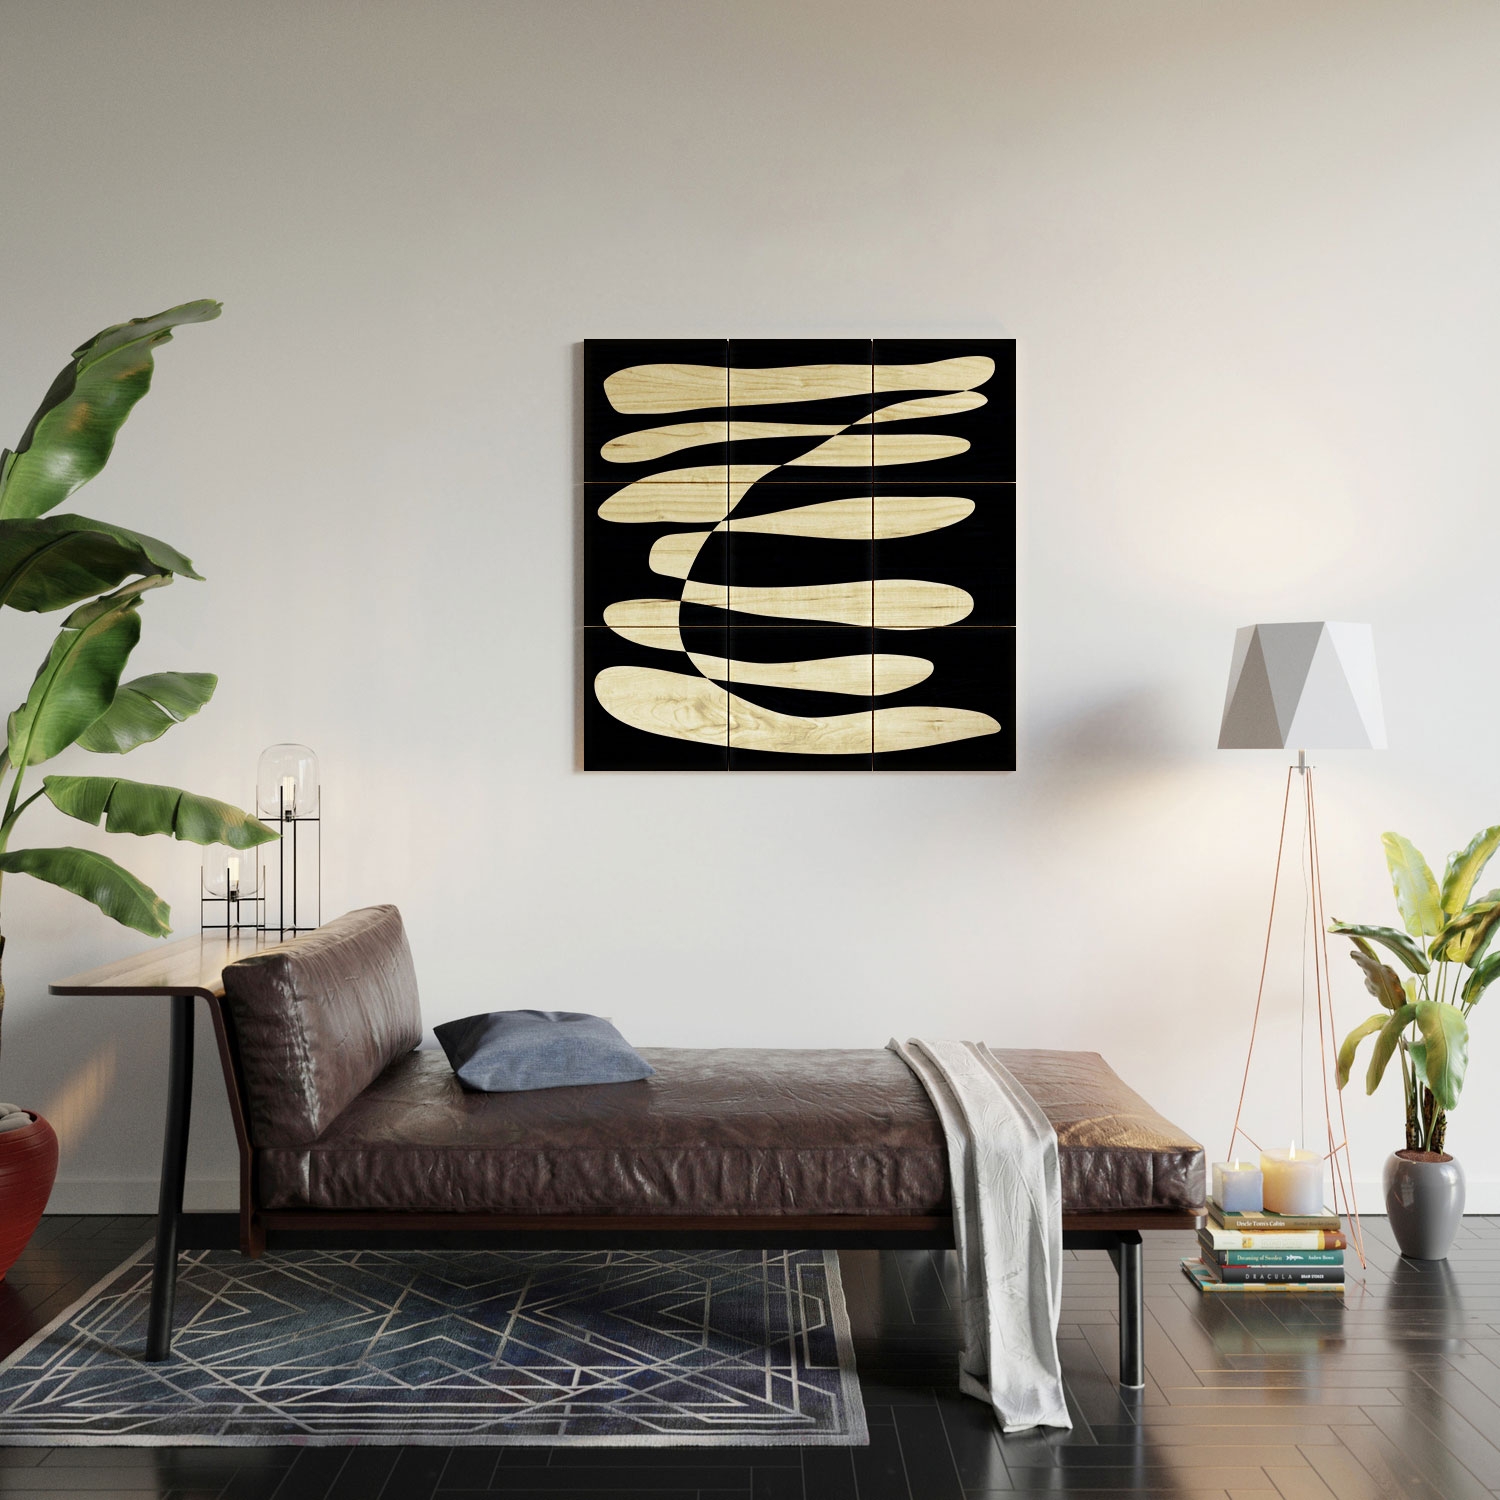 Abstract Composition In Black by June Journal - Wood Wall Mural3' X 3' (Nine 12" Wood Squares) - Image 1